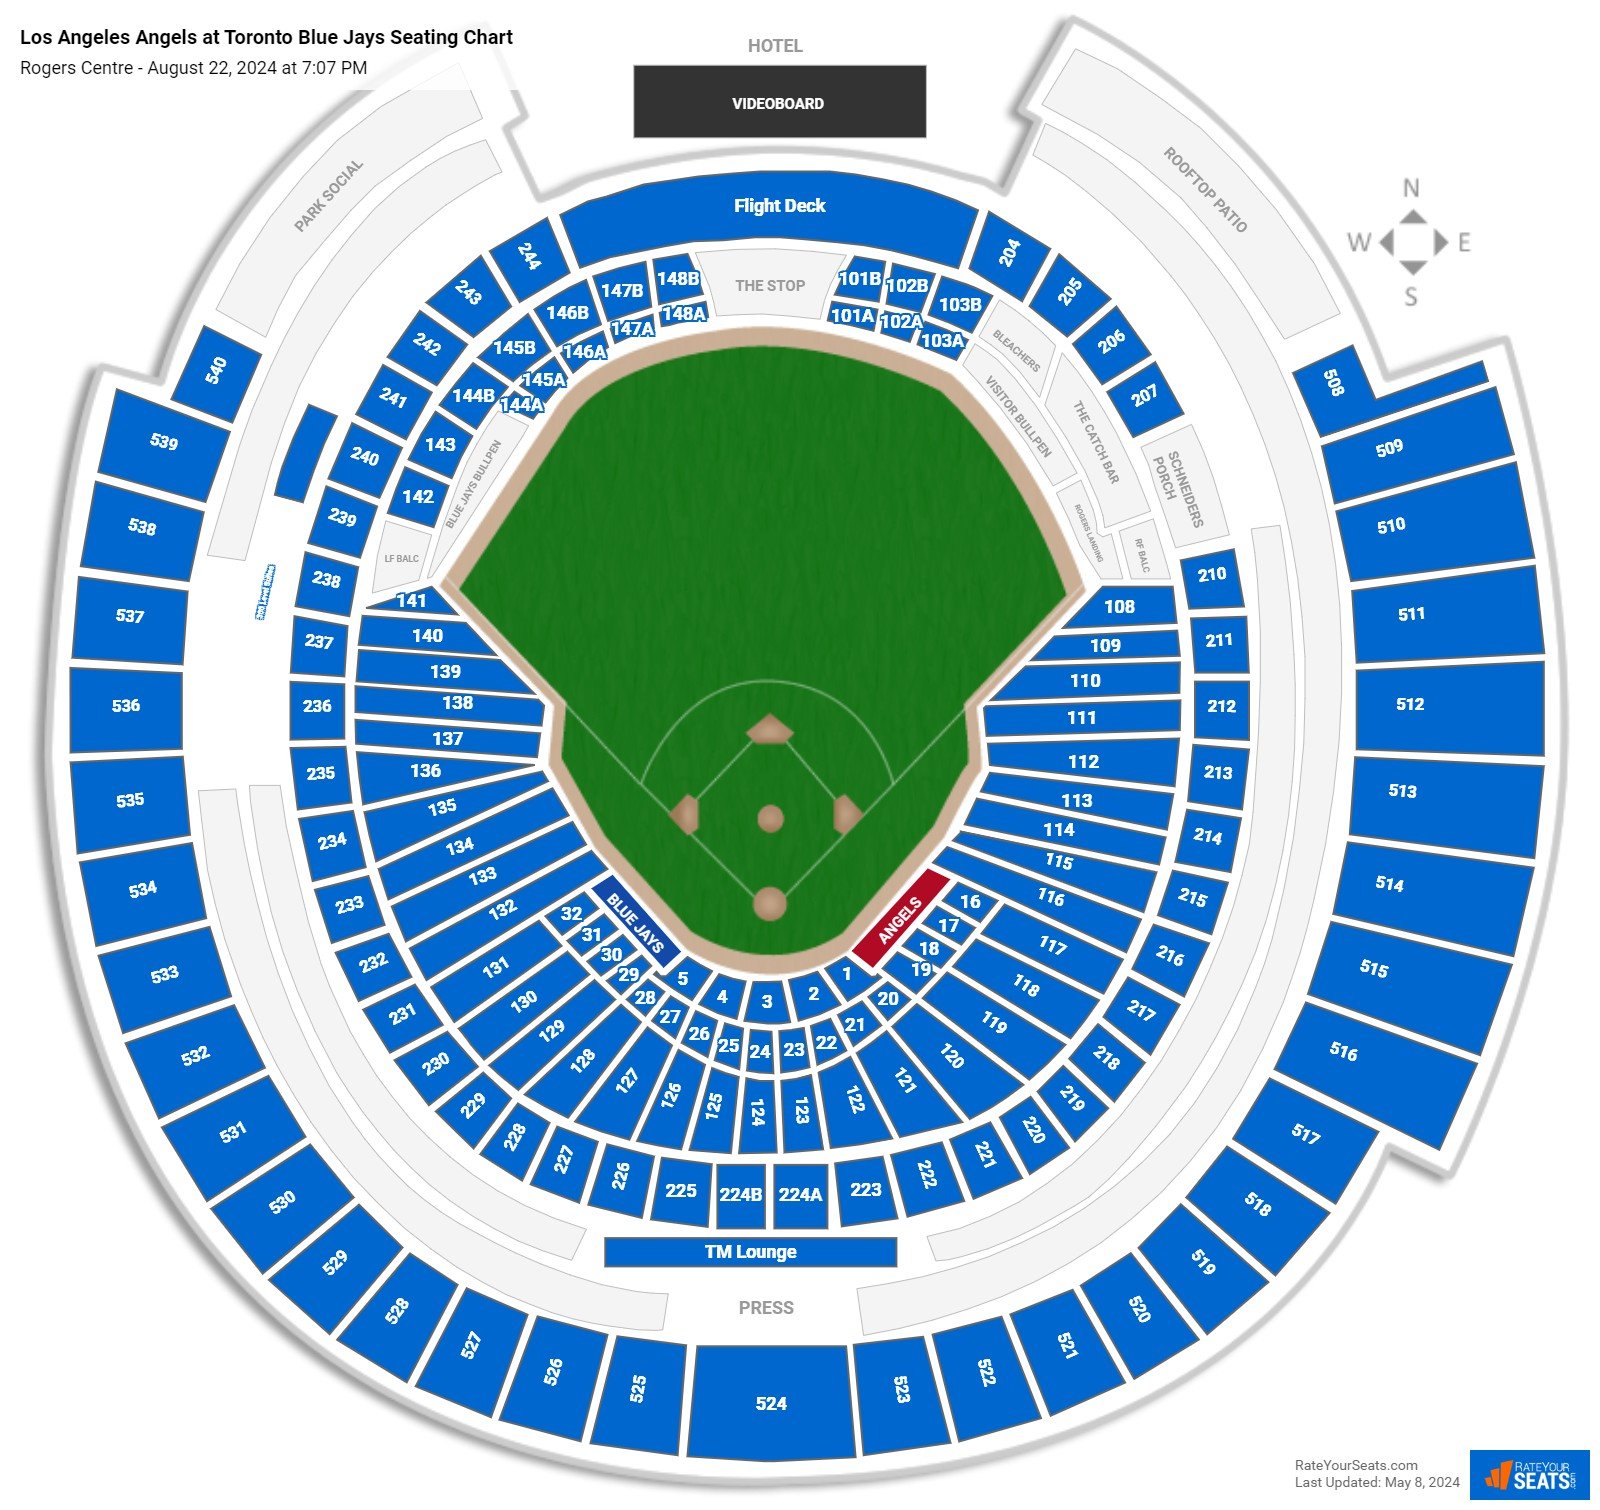 Los Angeles Angels at Toronto Blue Jays seating chart Rogers Centre